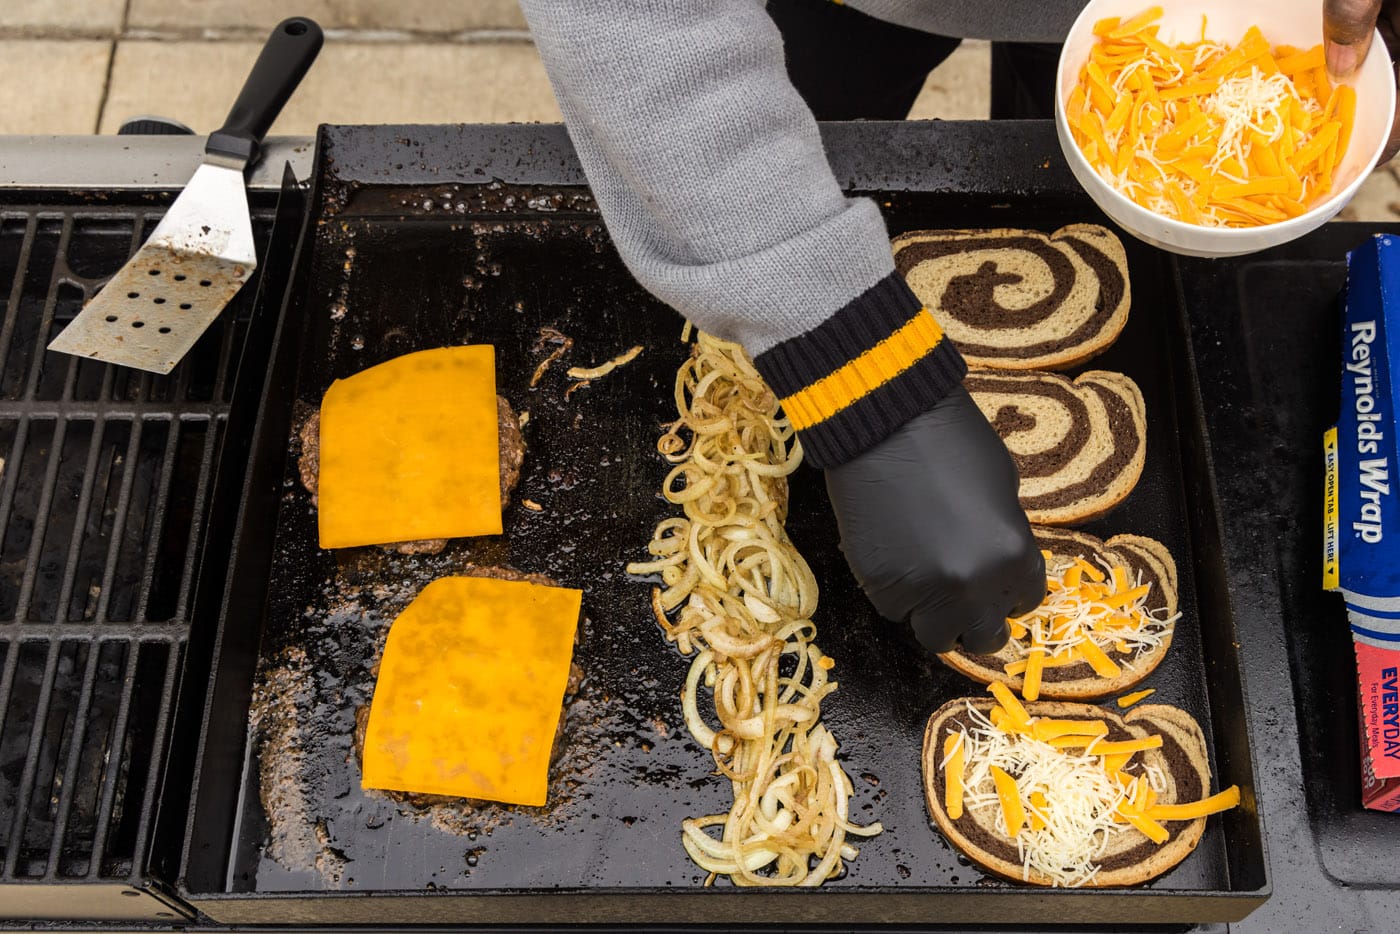 adding cheese to rye bread on a grill with onions and burgers